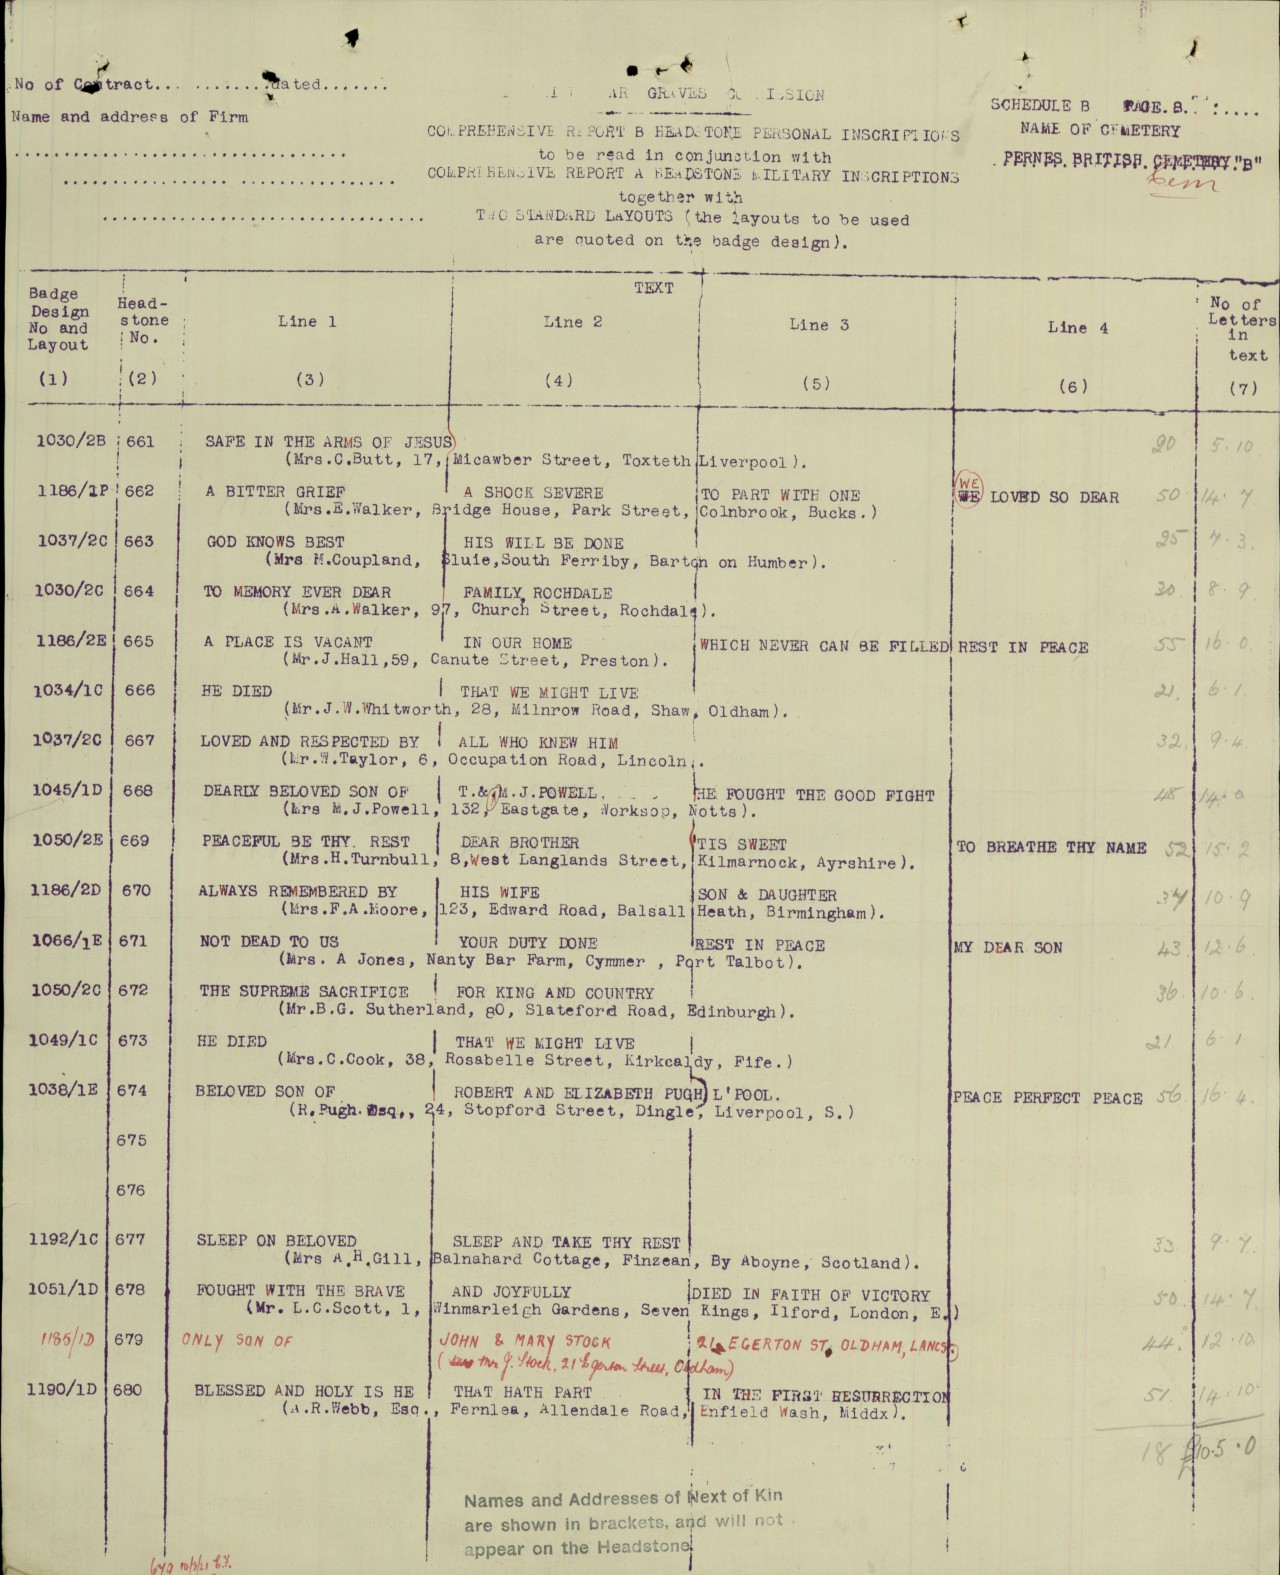 French WW1 grave record for Frederick Webb